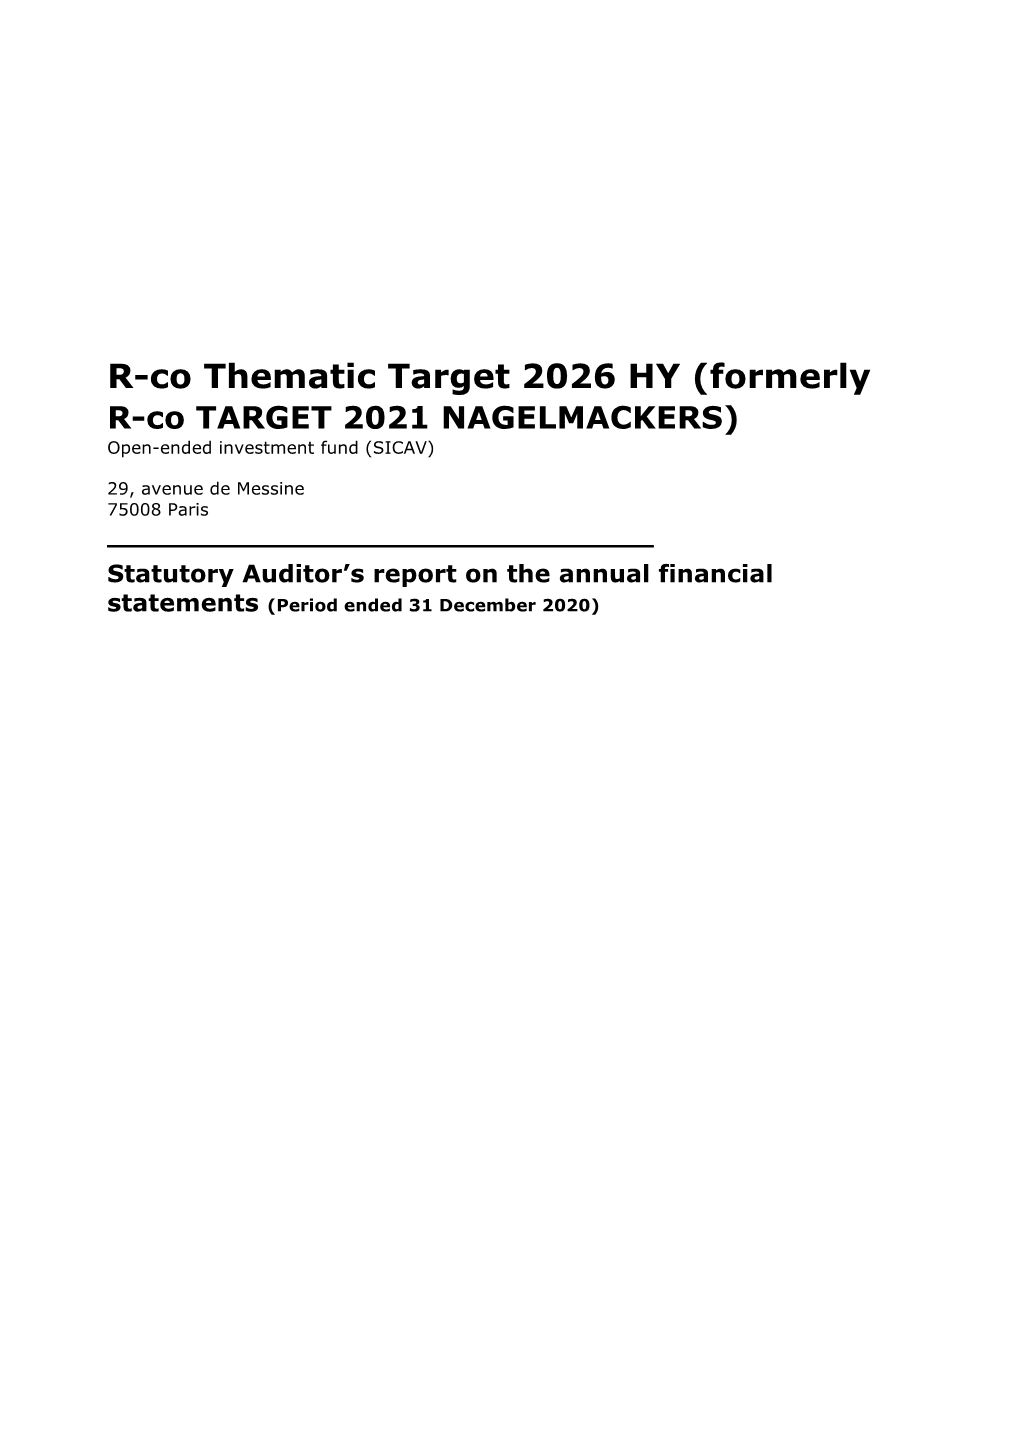 R-Co Thematic Target 2026 HY (Formerly R-Co TARGET 2021 NAGELMACKERS) Open-Ended Investment Fund (SICAV)